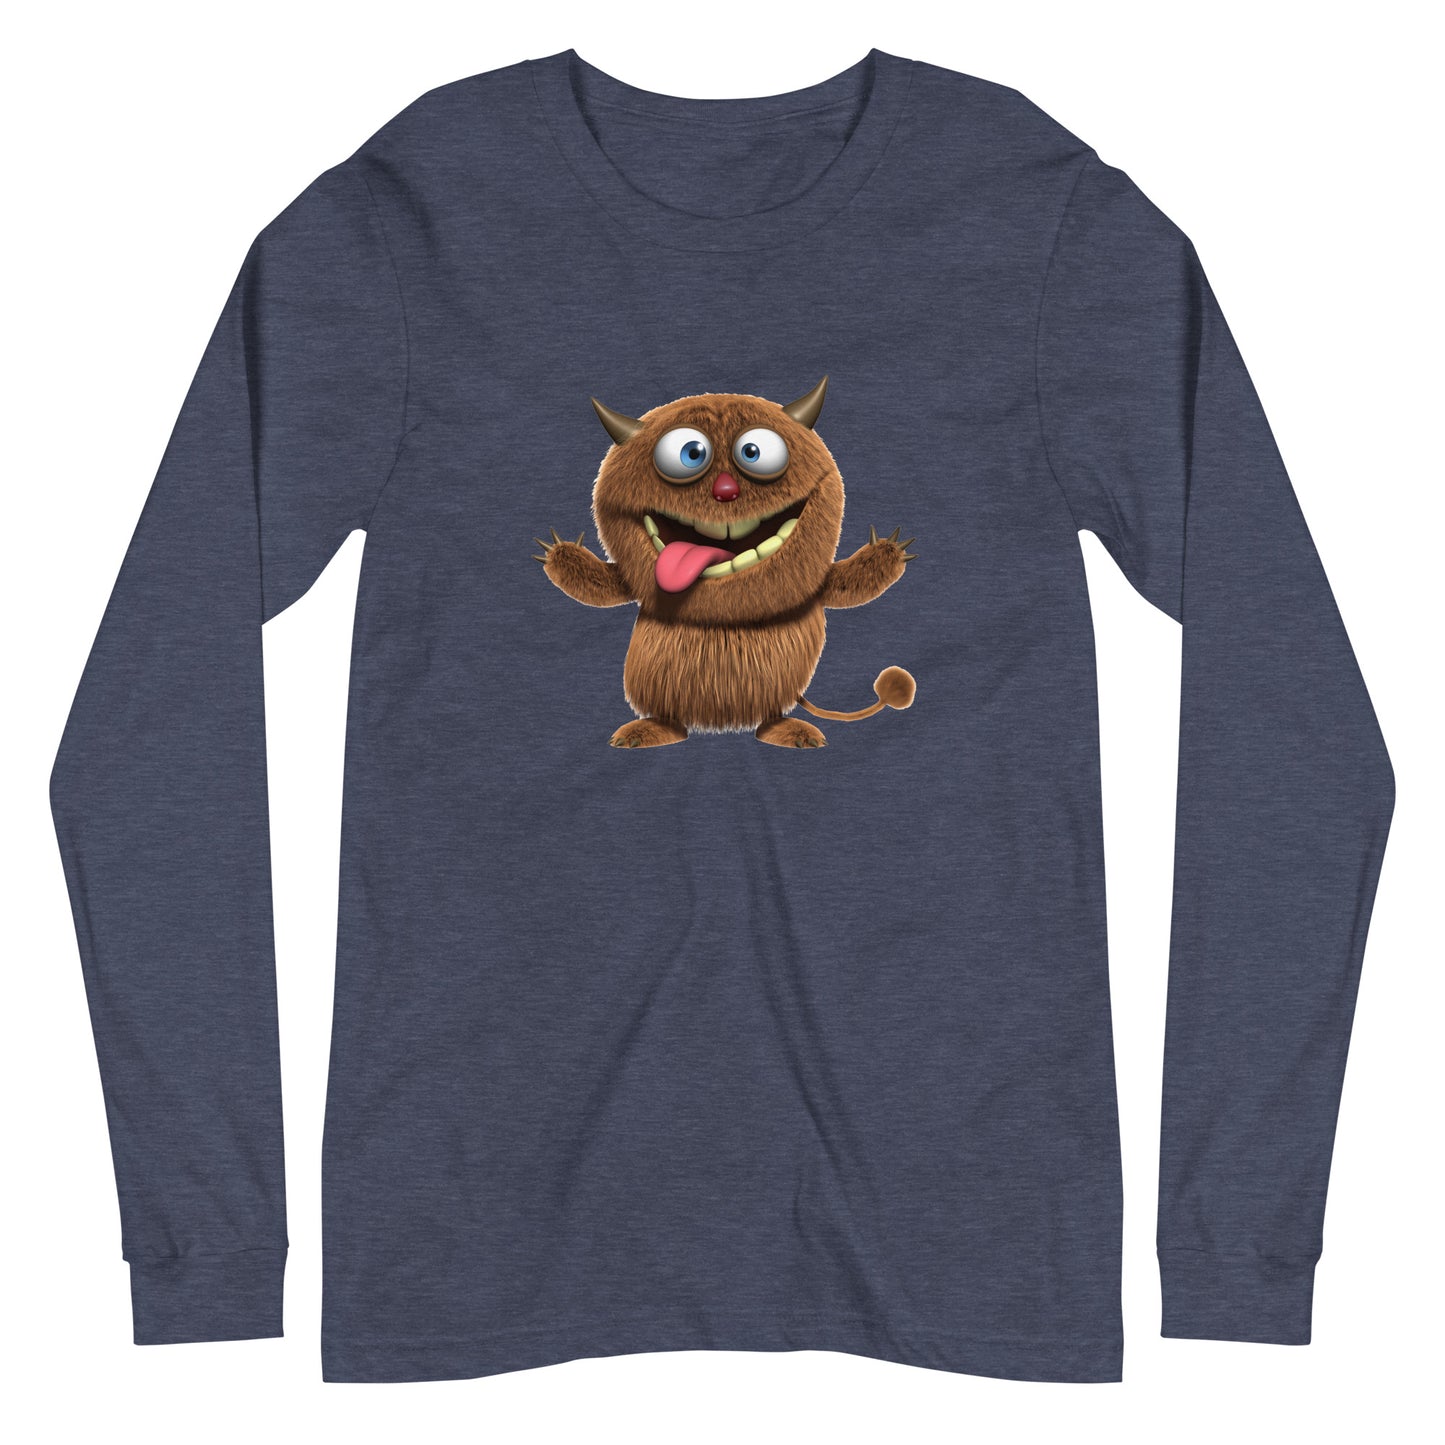 Super Silly & Soft THUMPER L/S Tee - Pulphouse Fiction Magazine Unisex Long Sleeve Tee